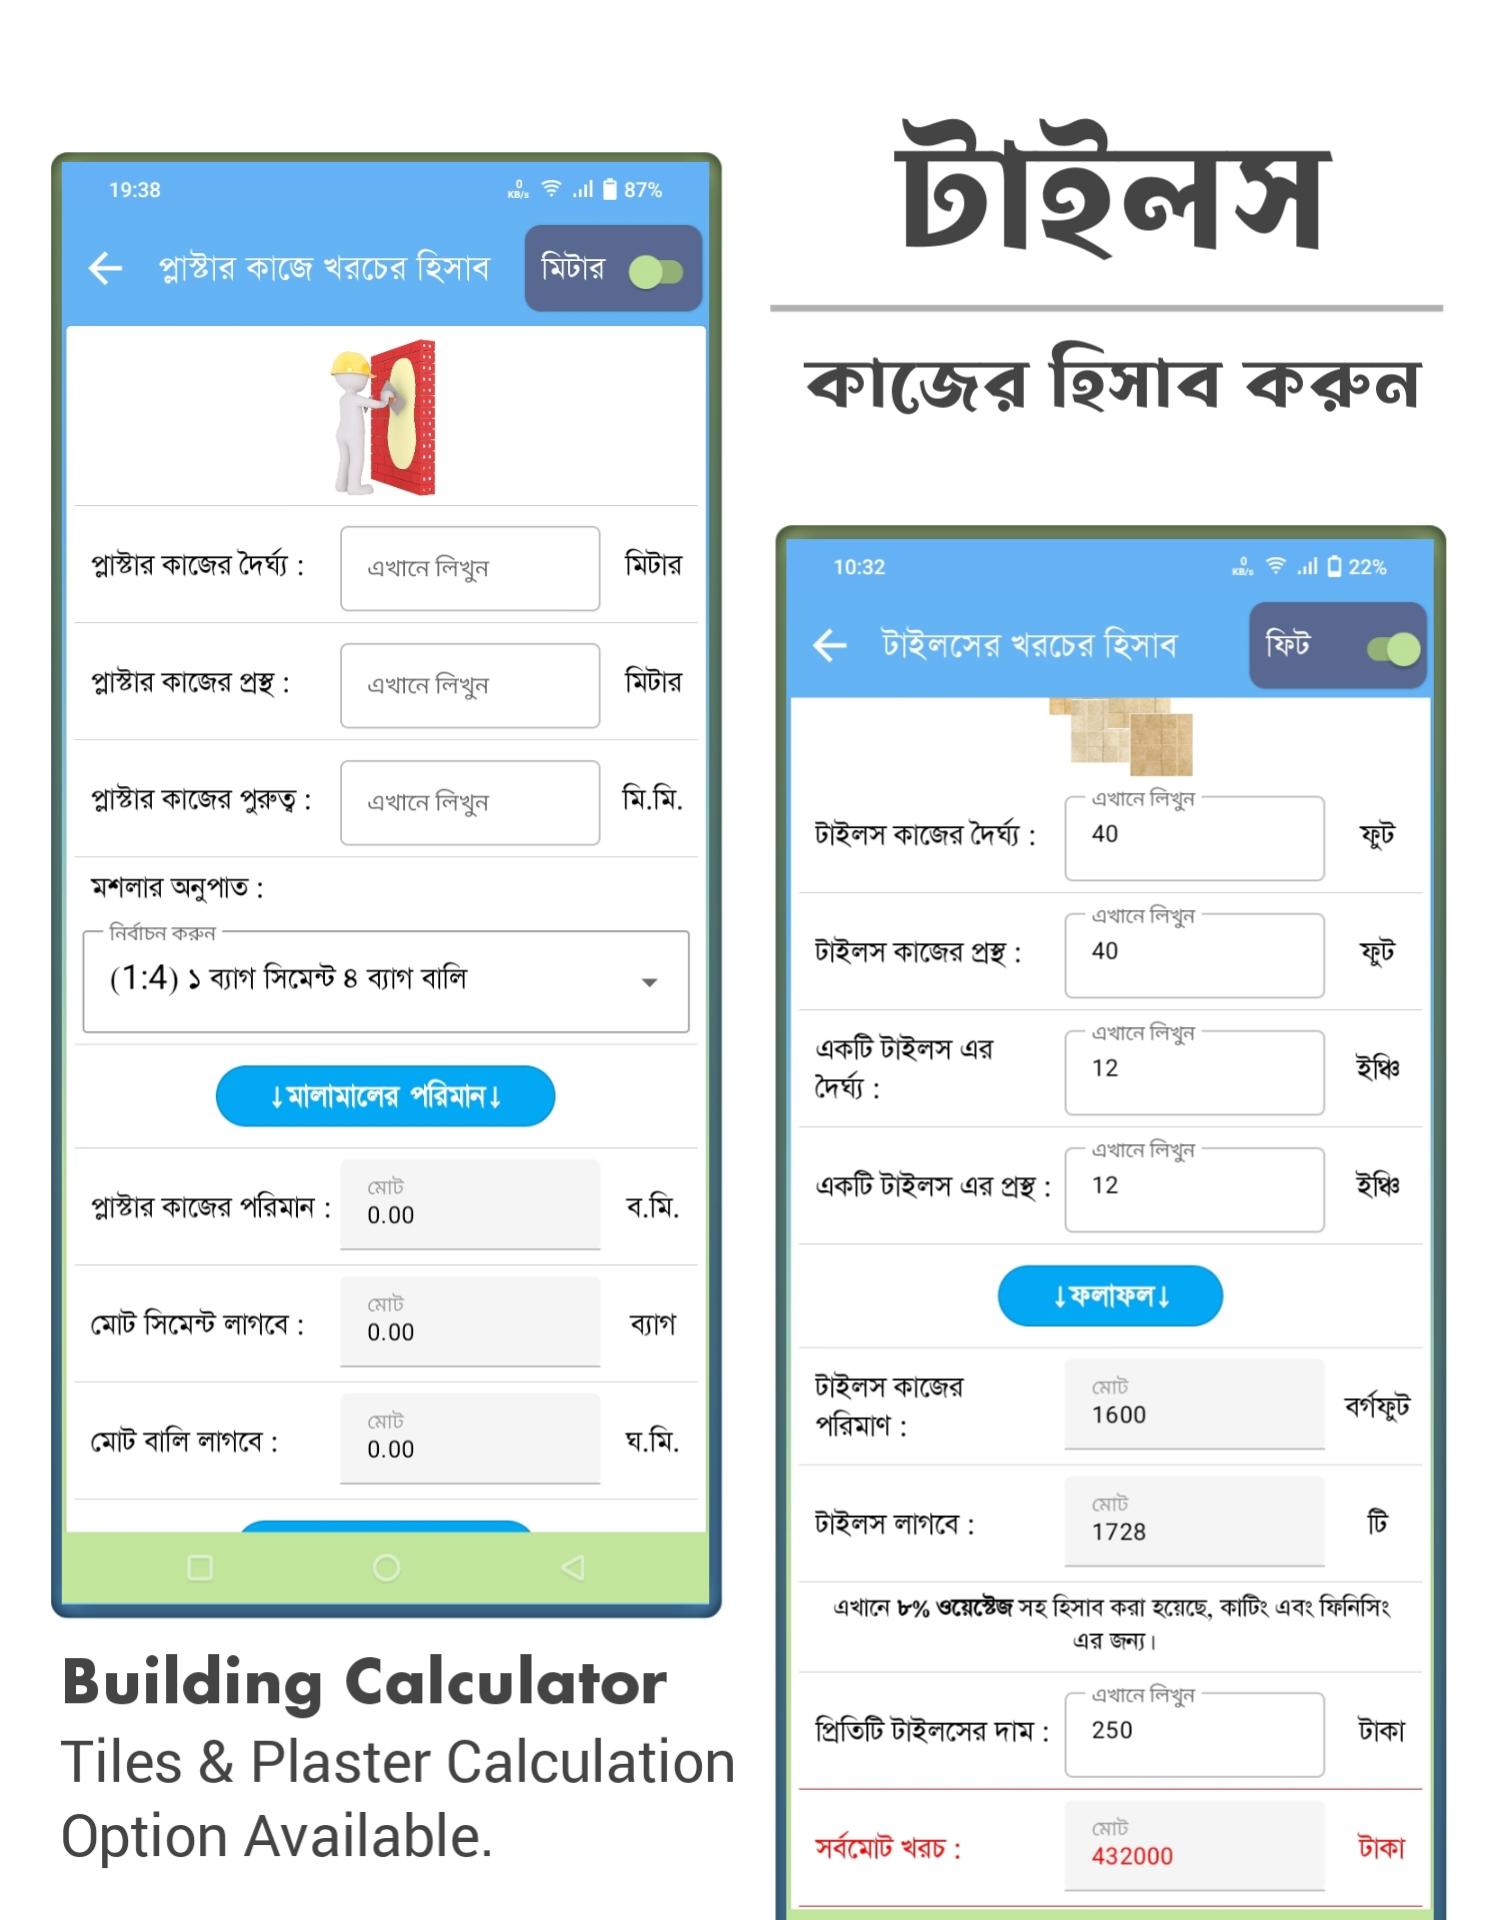 Building calculator. IELTS synonyms. Percentage synonyms IELTS. IELTS Computer delivered. Biletal.